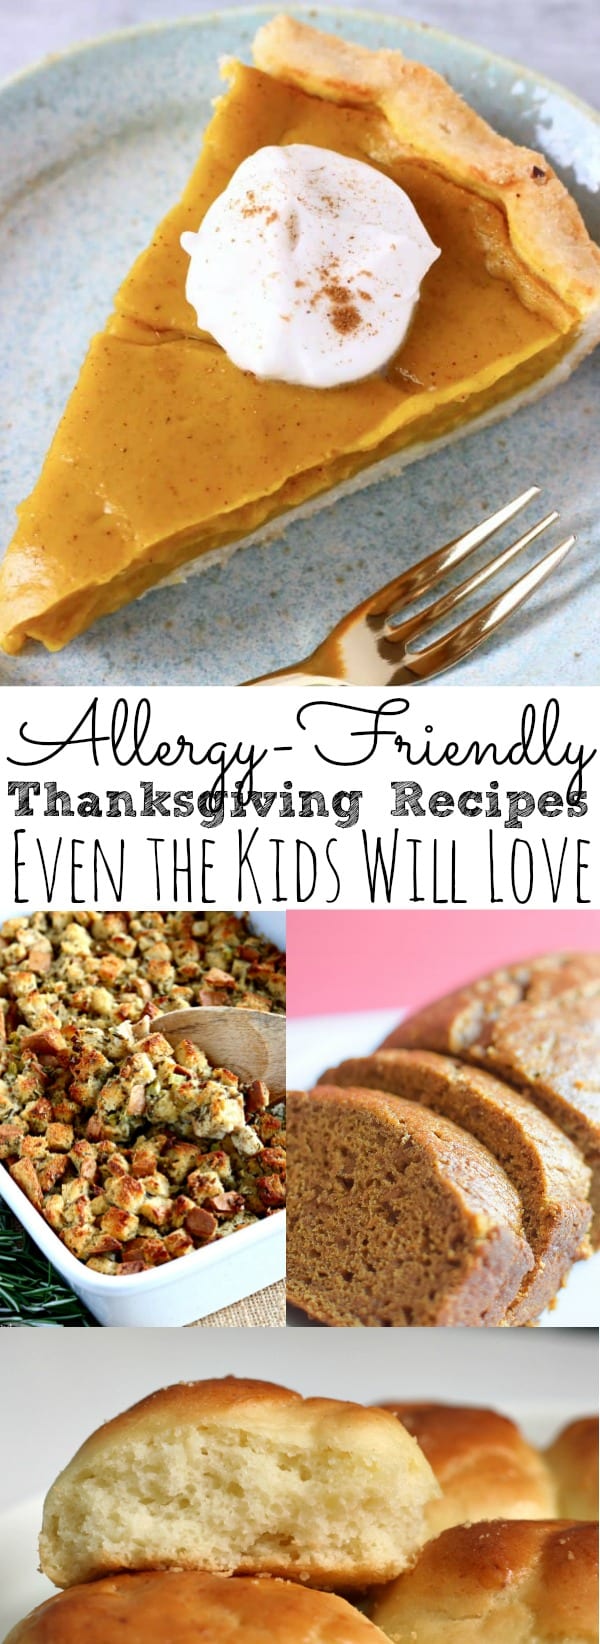 Allergy-Friendly Thanksgiving Recipes Even the Kids Will Love